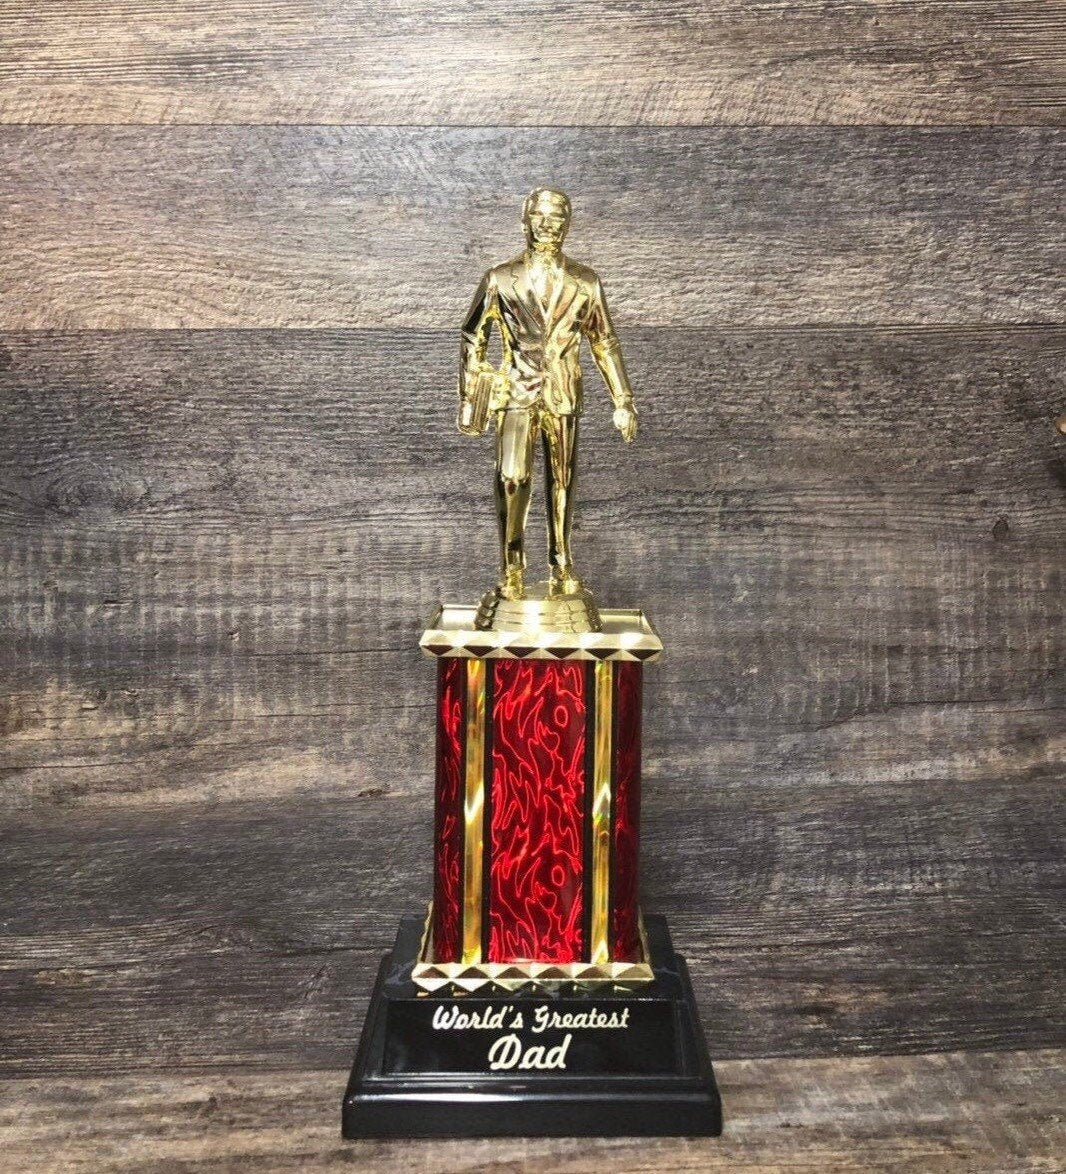 World's Greatest Dad Funny Trophy Custom Father's Day Best Dad Gift Corporate Top Salesman Award Adult Humor Gag Gift Best Husband Boyfriend